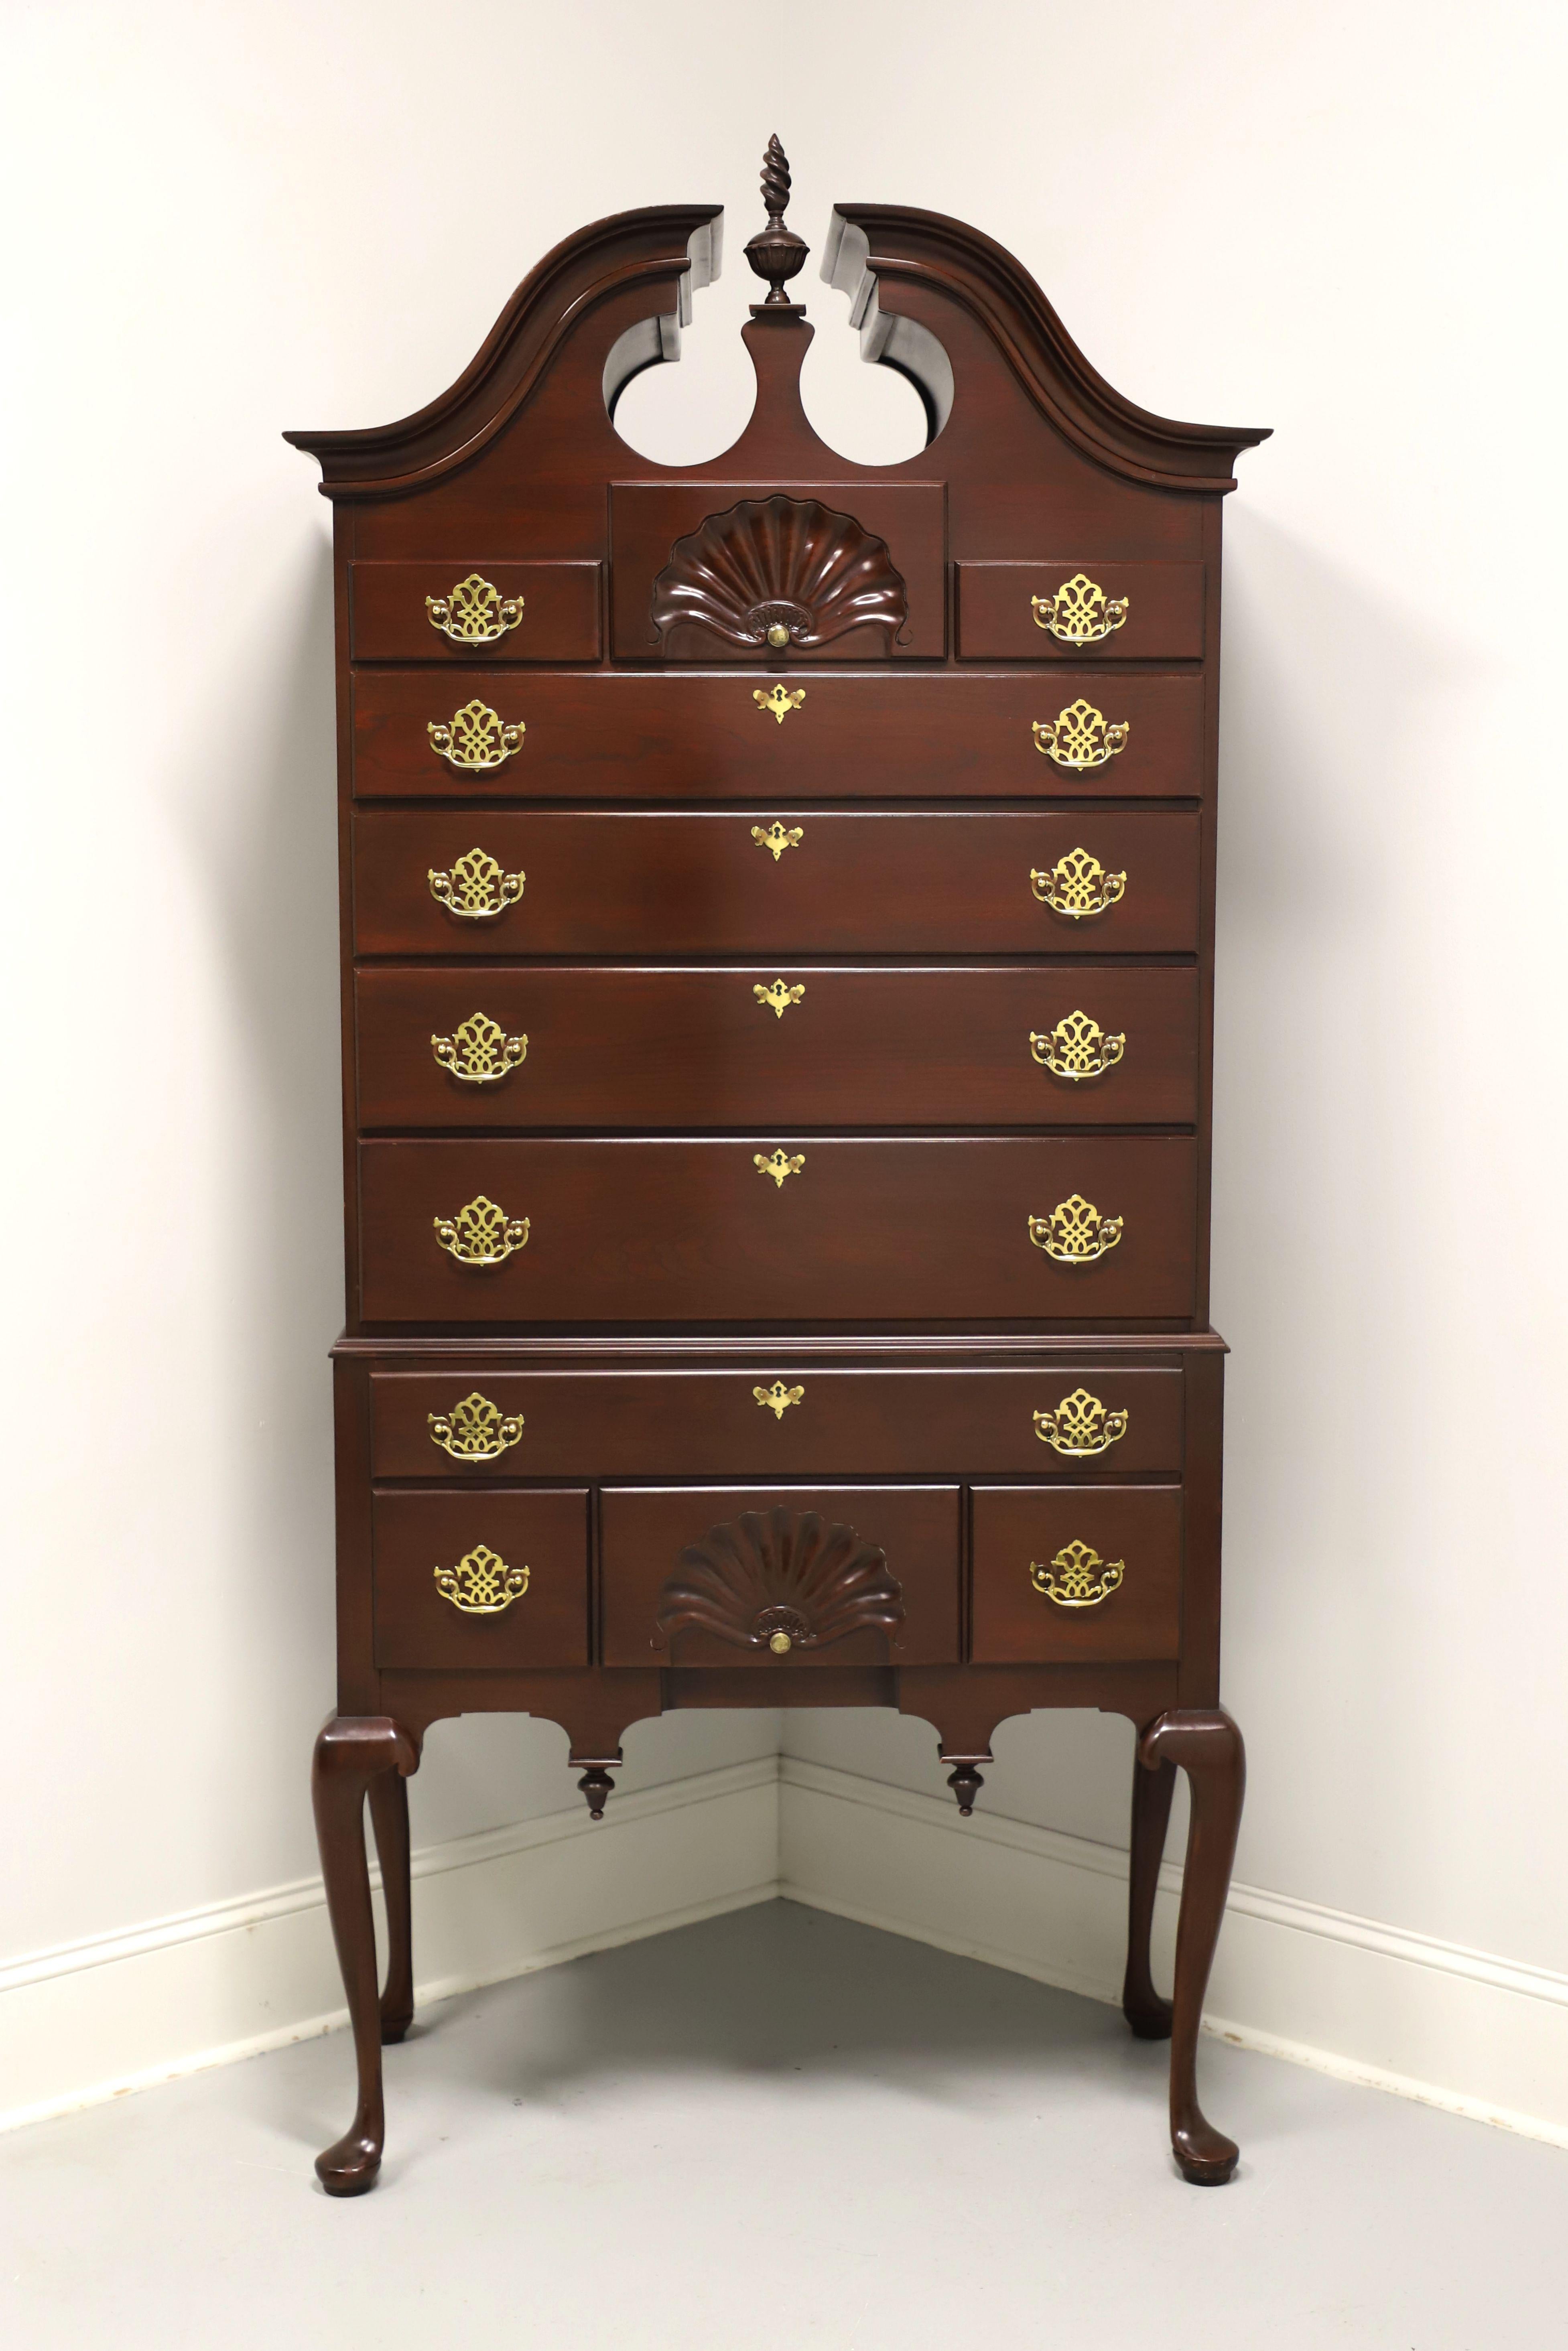 A Queen Anne style highboy chest by Harden Furniture. Solid cherry wood with brass hardware, complimented by broken bonnet top, flame form center finial, shell carvings, carved apron with decorative reverse finials, and raised on tall cabriole legs